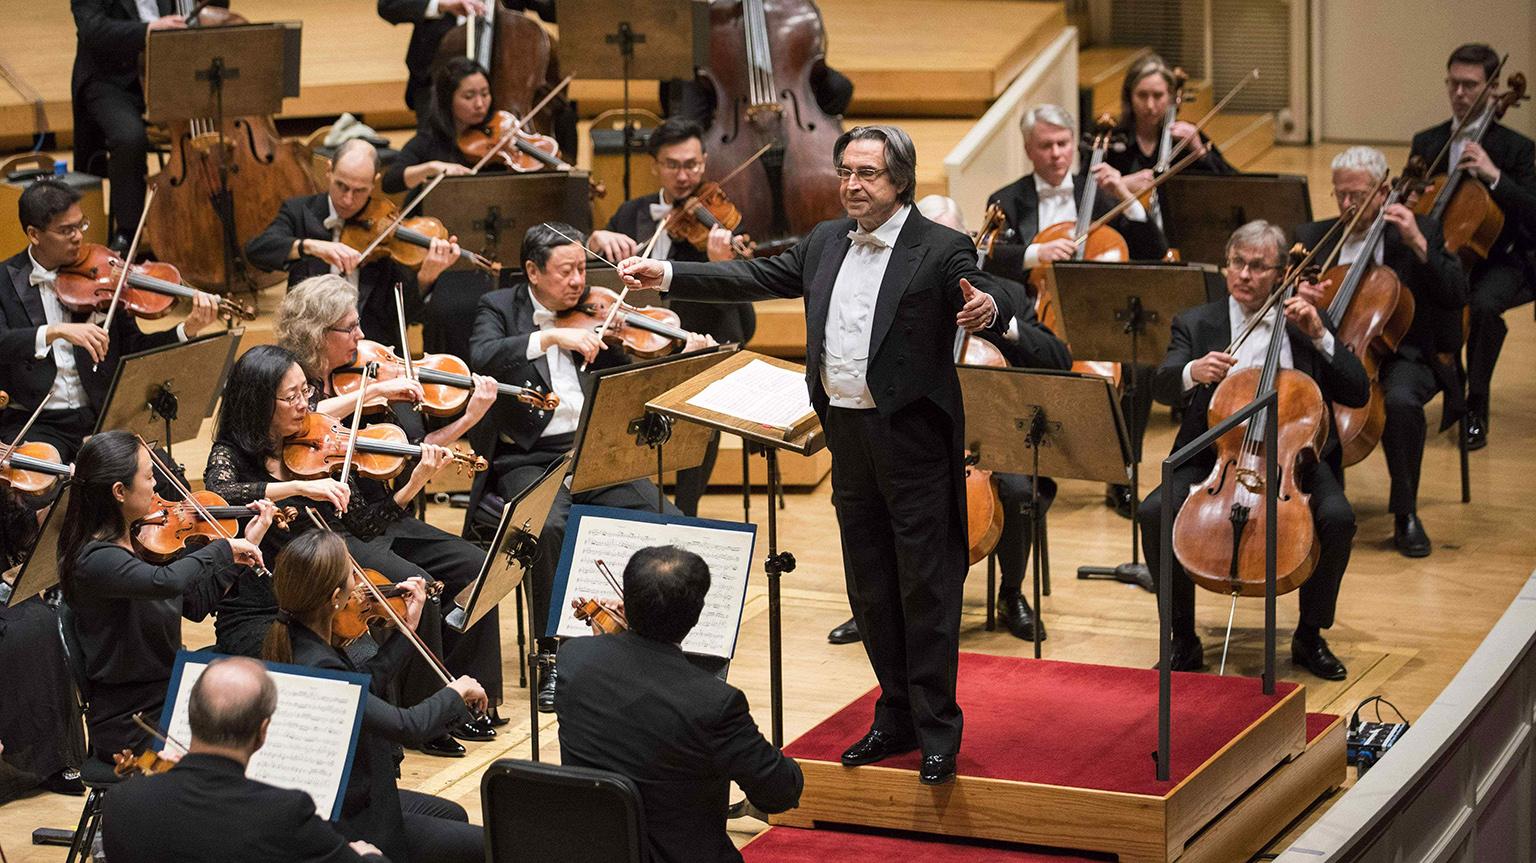 Music Director Riccardo Muti leads the CSO in Mozart’s “Symphony No. 36” on March 15, 2018. (Credit: Todd Rosenberg Photography)